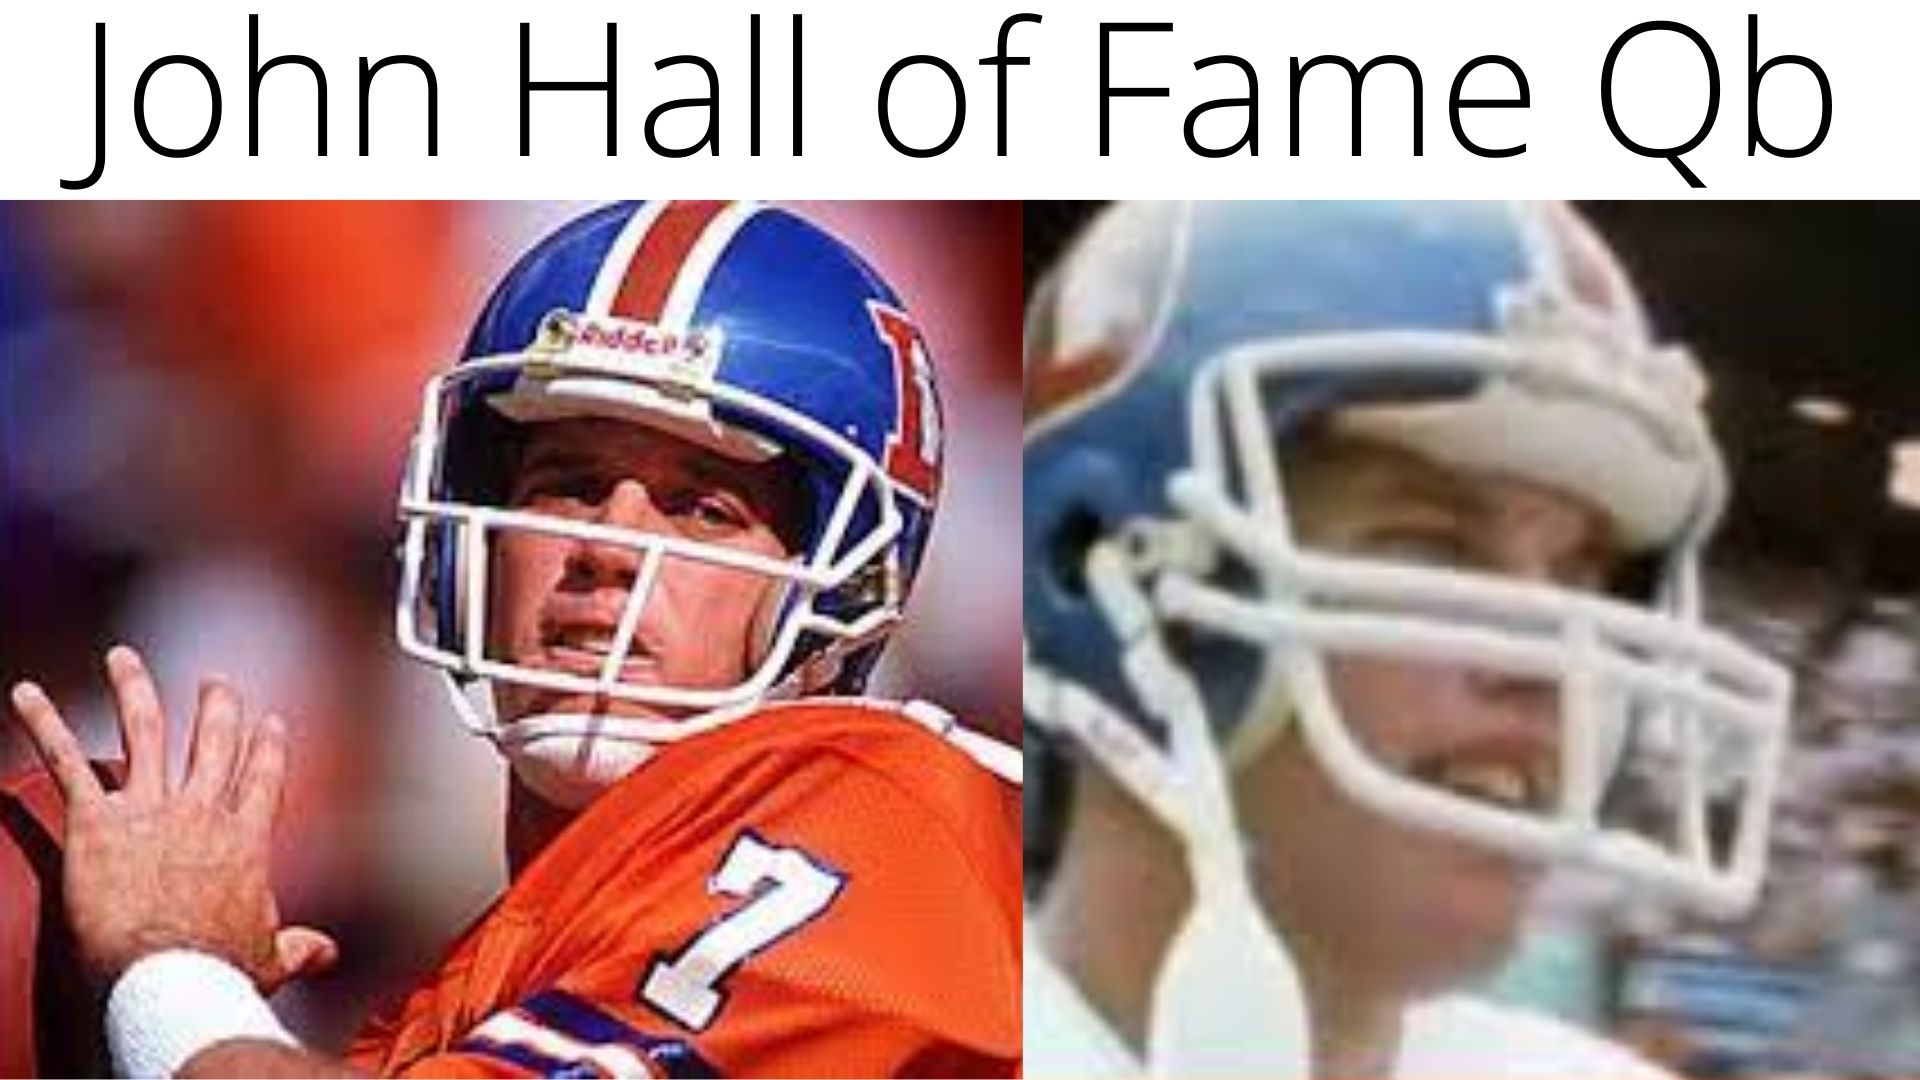 John Hall of Fame Qb (May 2022) What You Need To Know